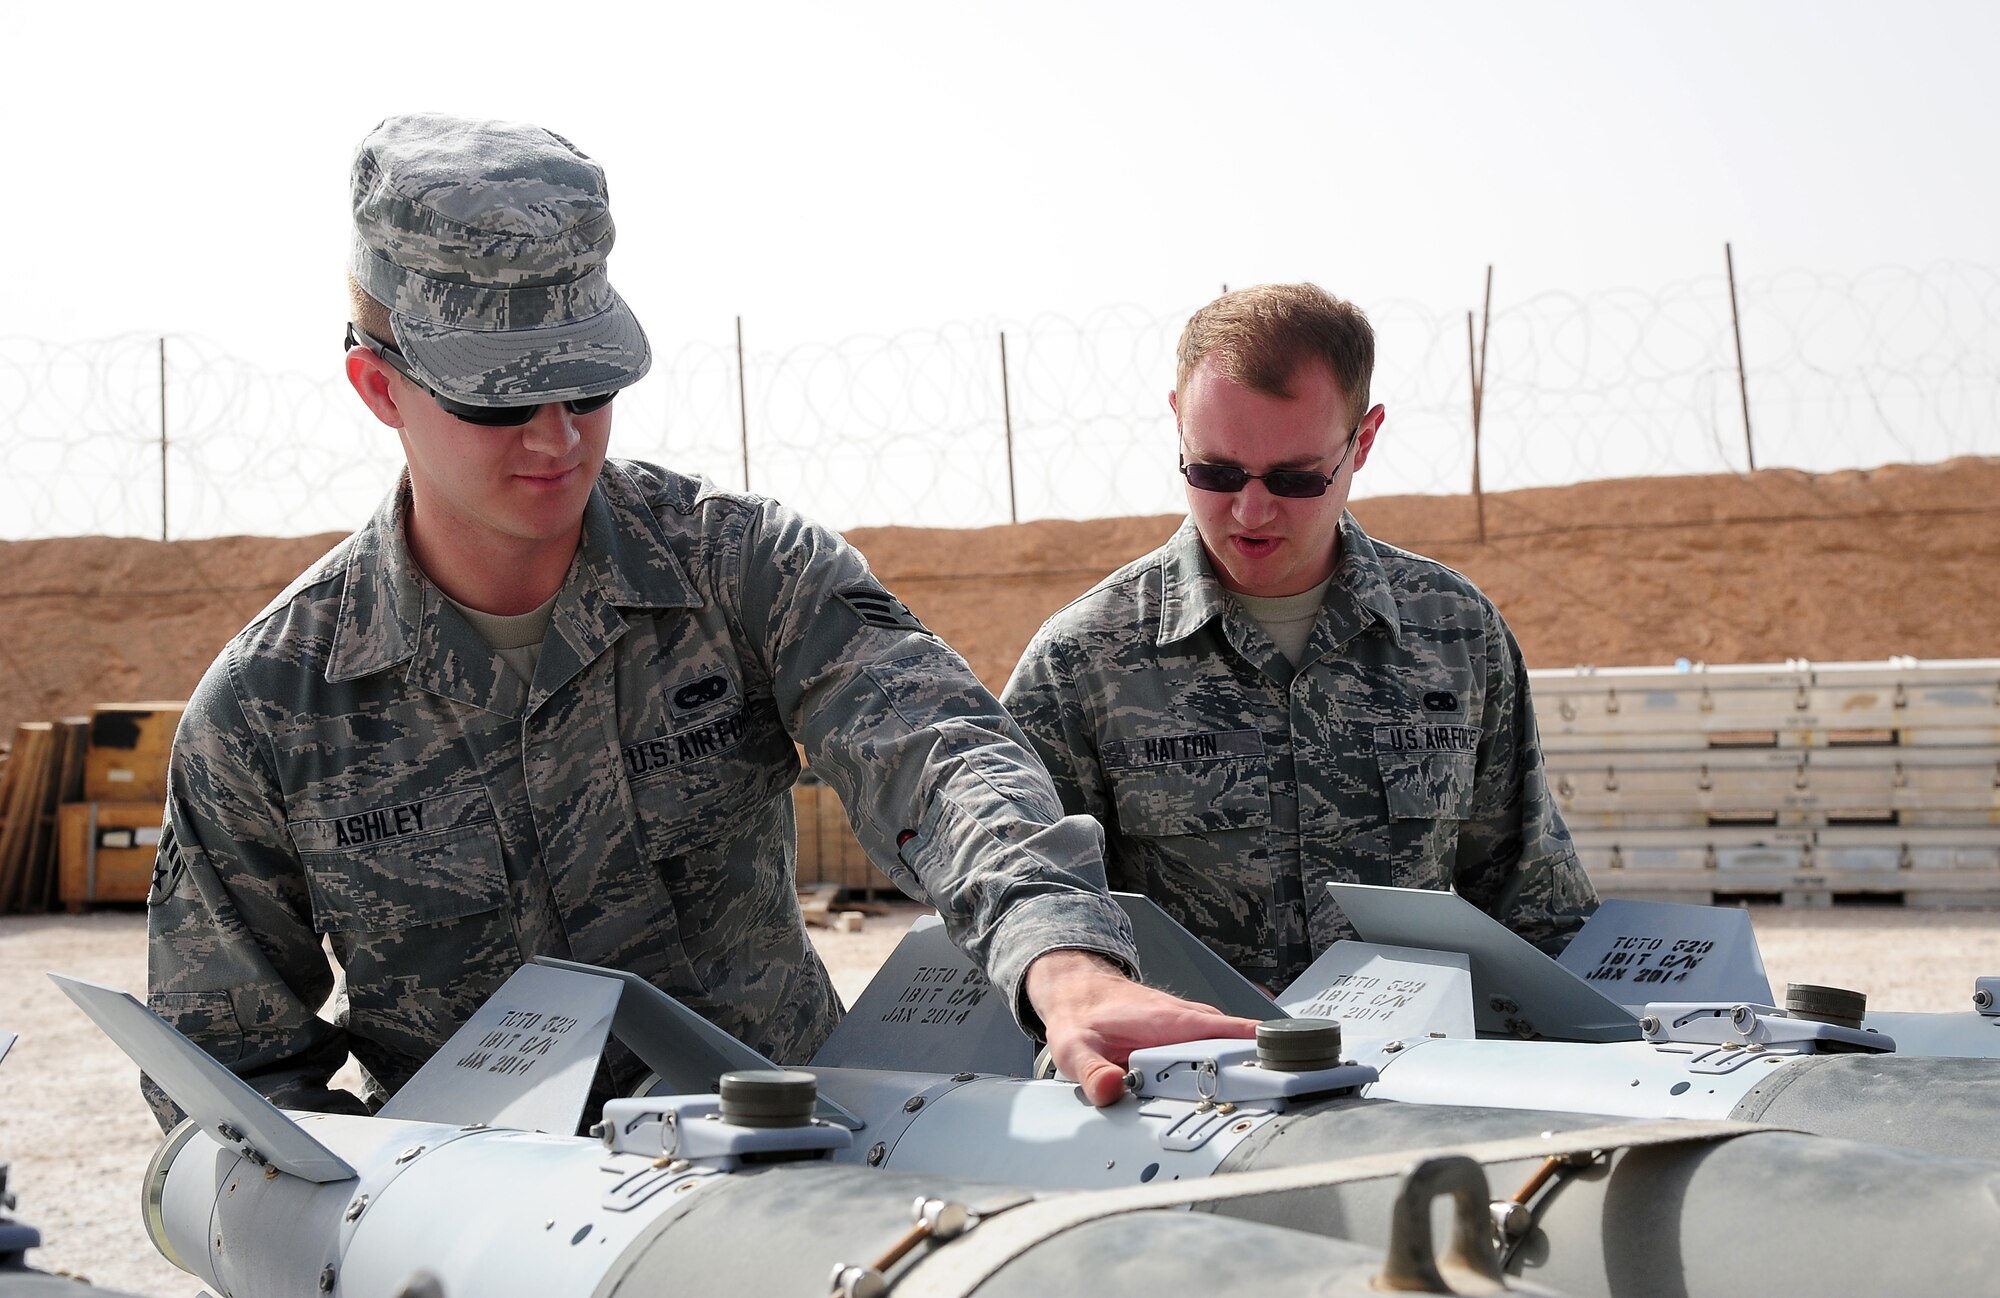 U.S. Air Force Senior Airman Matt Ashley, left, a munitions systems controller, and Airman 1st Class Clint Hatton, a munitions crew member, perform a joint direct attack munition post-assembly inspection during Exercise Eager Lion June 4, 2014, at an air base in northern Jordan. Throughout Eager Lion, F-16 Fighting Falcons from Misawa were armed with munitions for various air-to-air and air-to-ground scenarios with partner nations. (U.S. Air Force photo by Staff Sgt. Brigitte N. Brantley/Released)